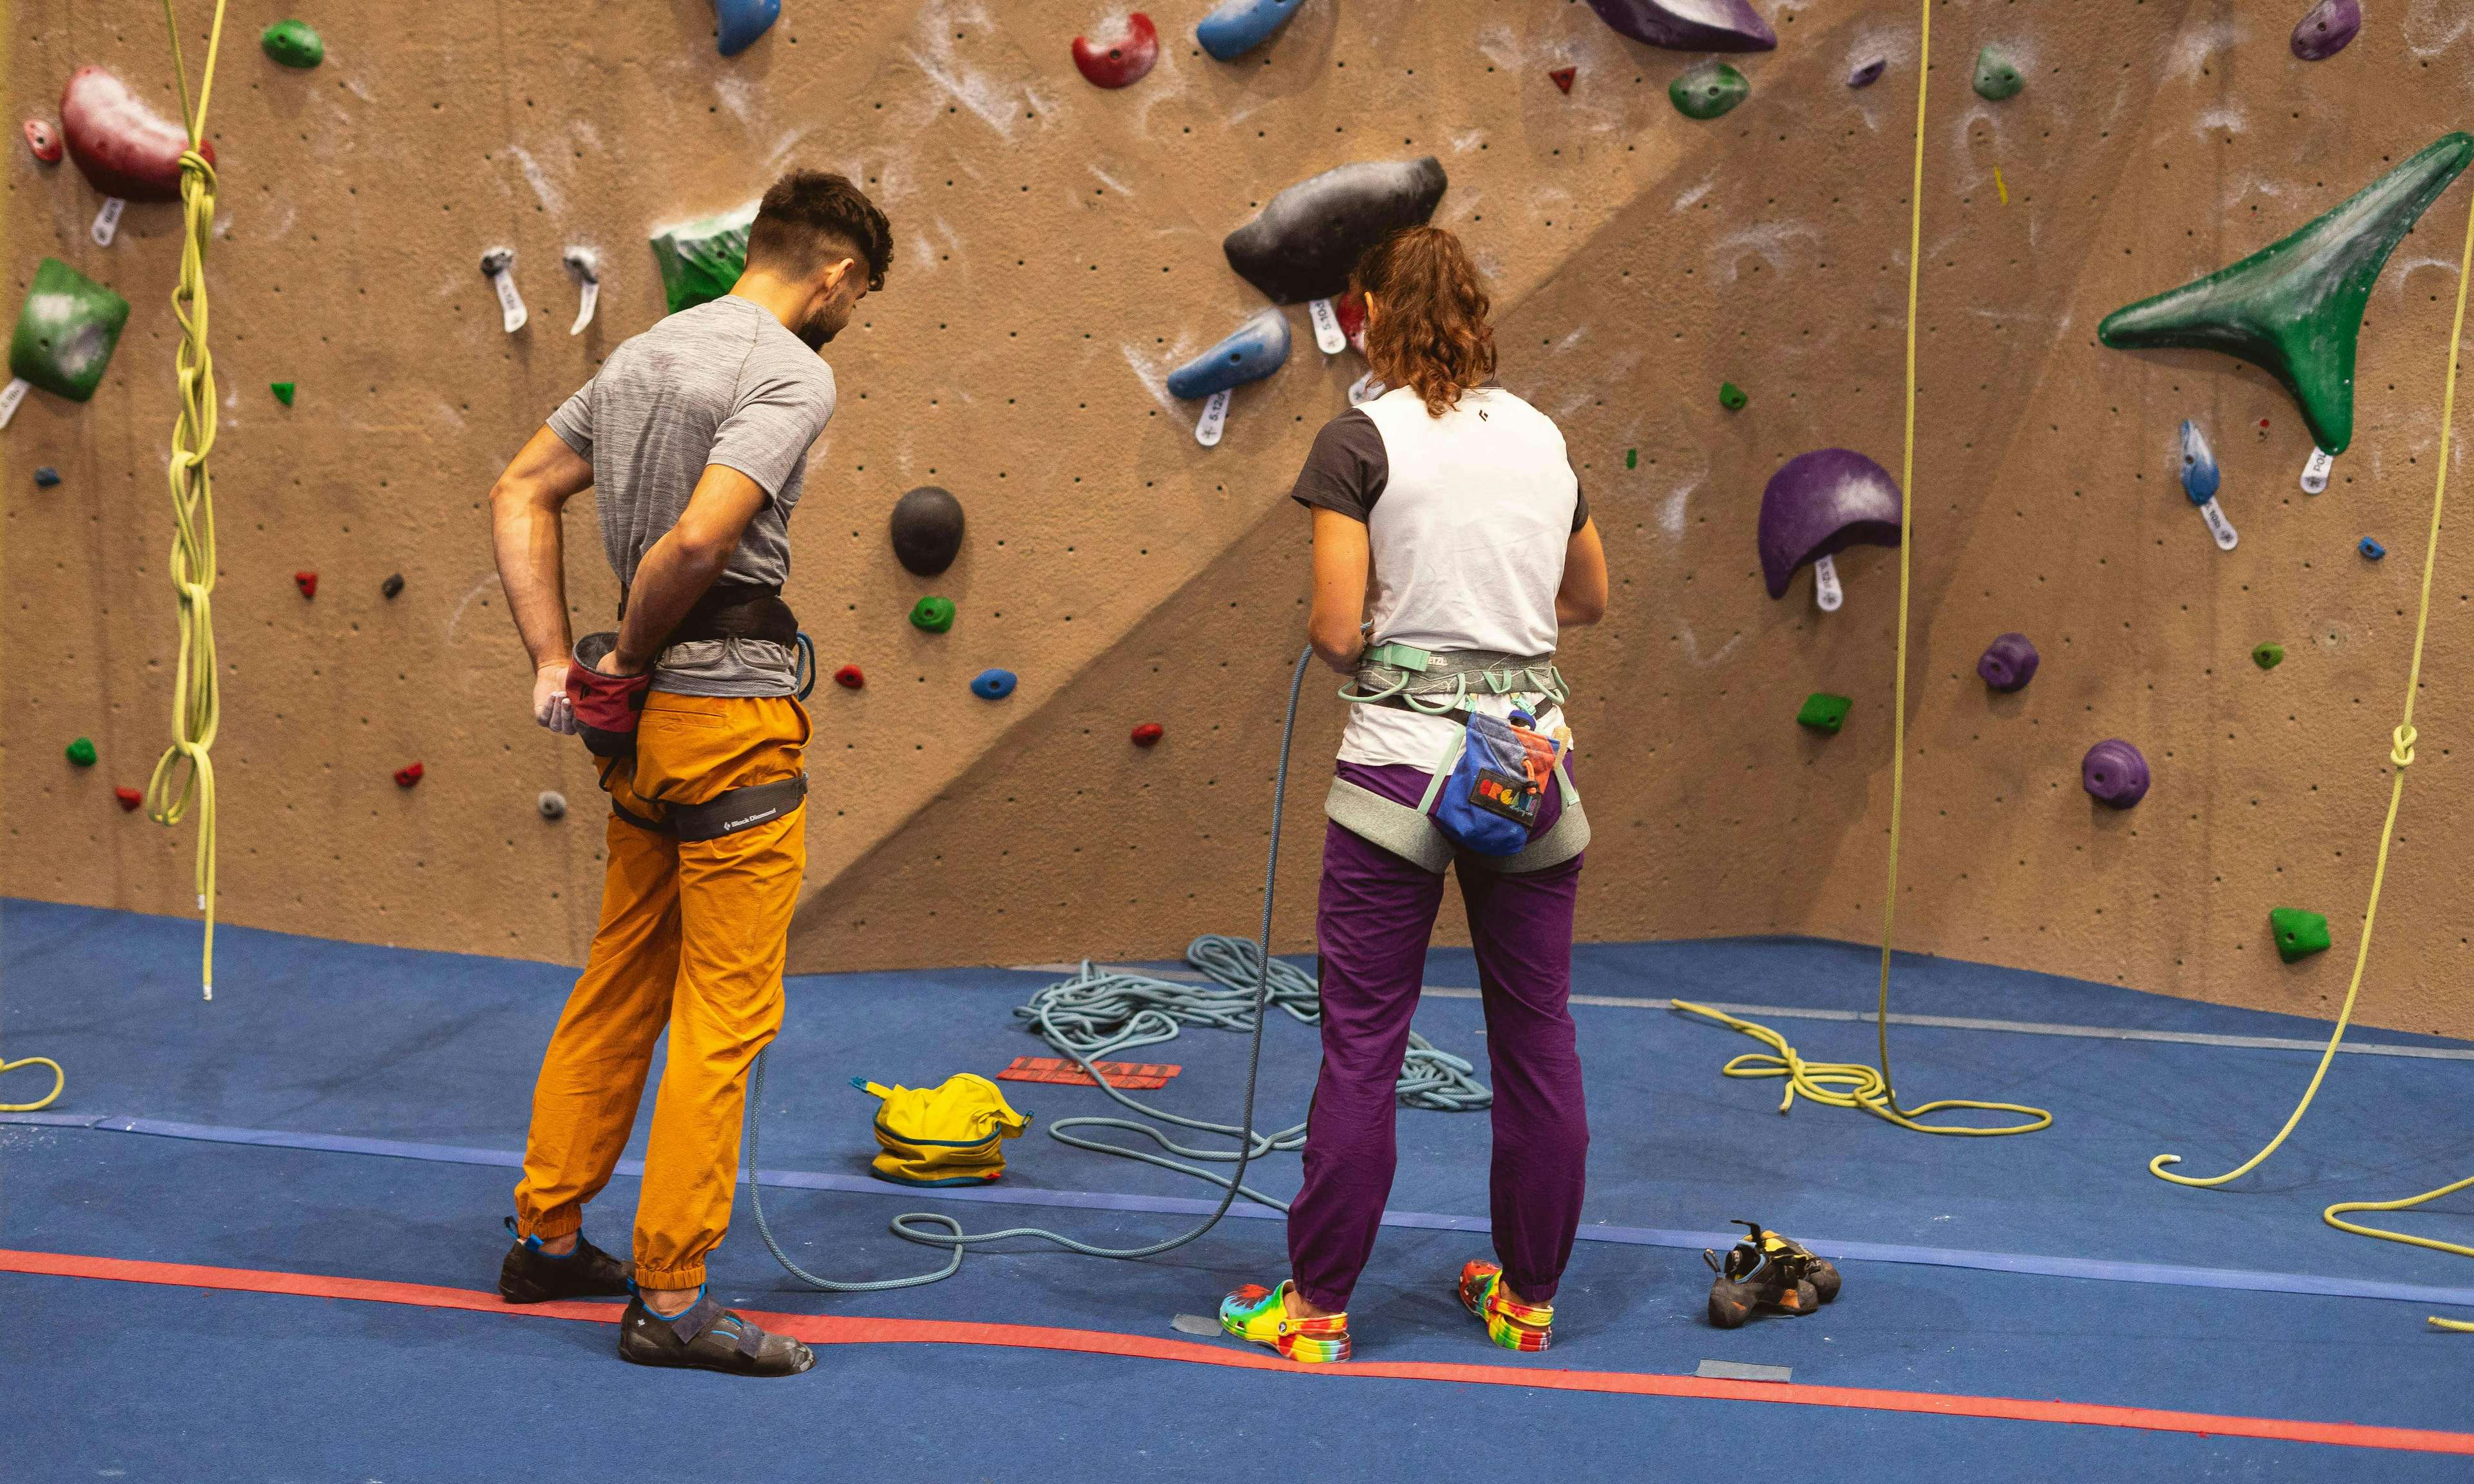 Two climbers in gym, one wearing slip on sandals